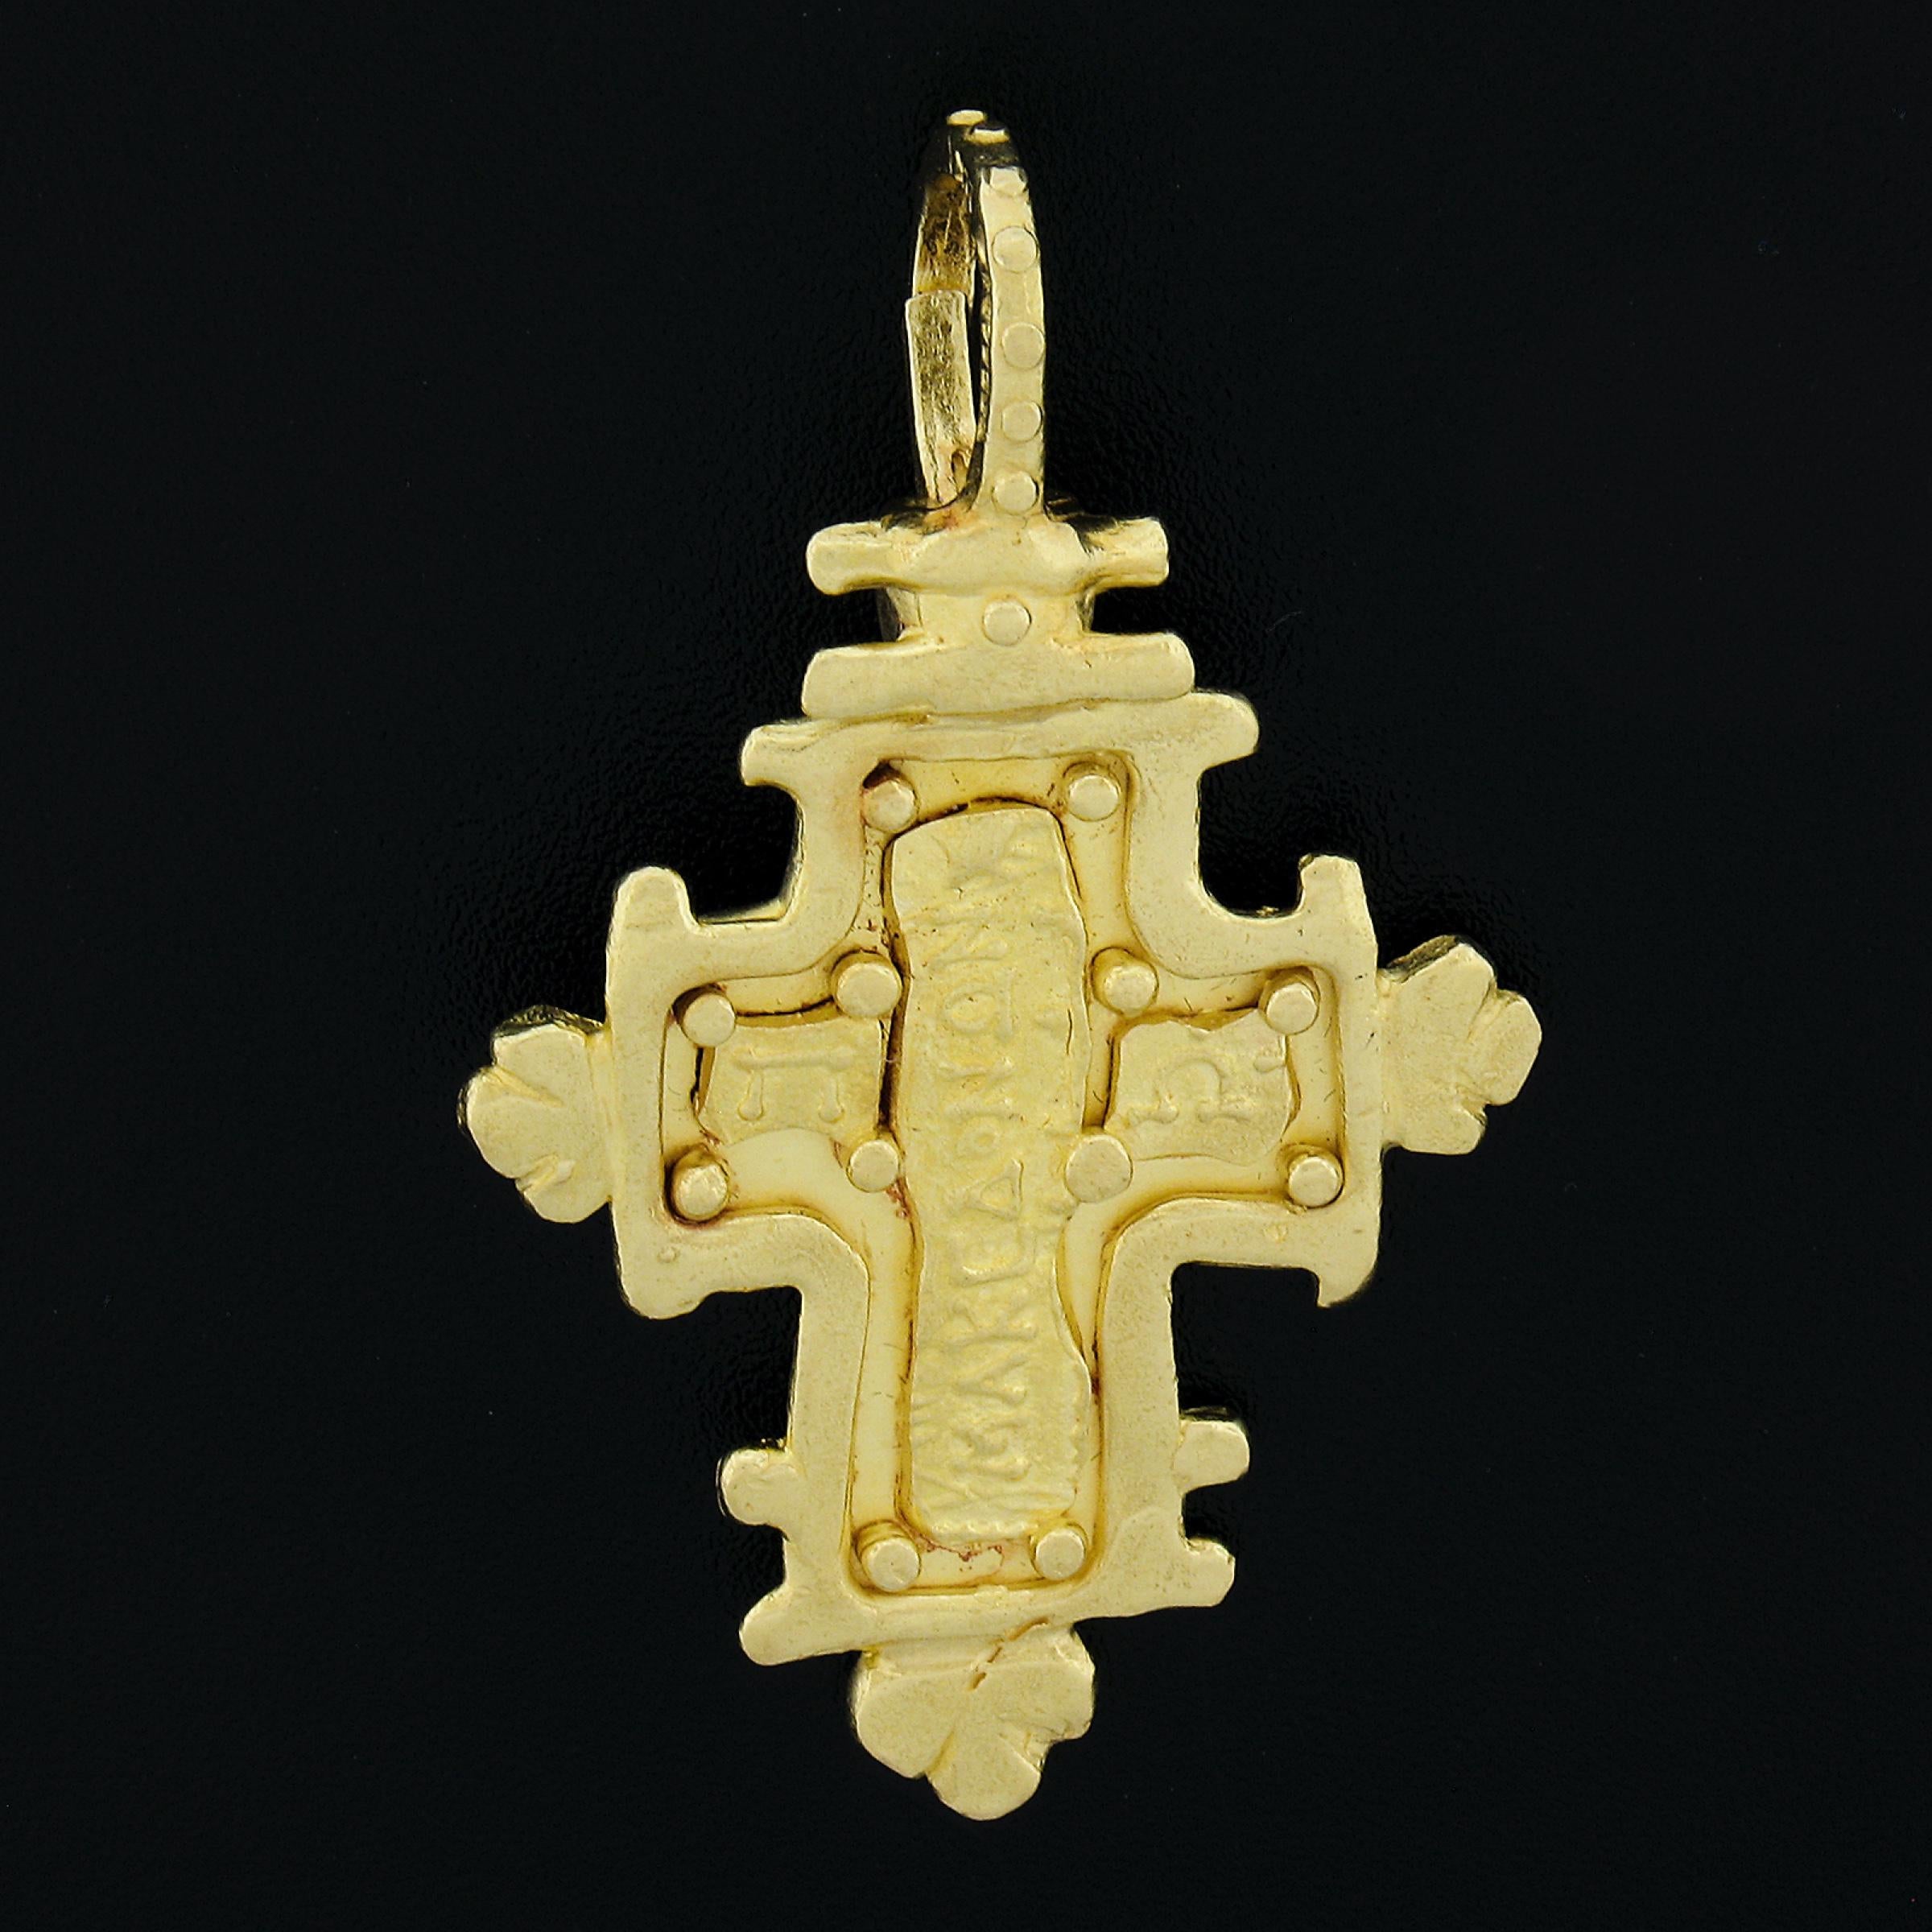 Material: 22K Solid Yellow Gold
Weight: 16.41 Grams
Pendant Height: 50.6mm (1.9